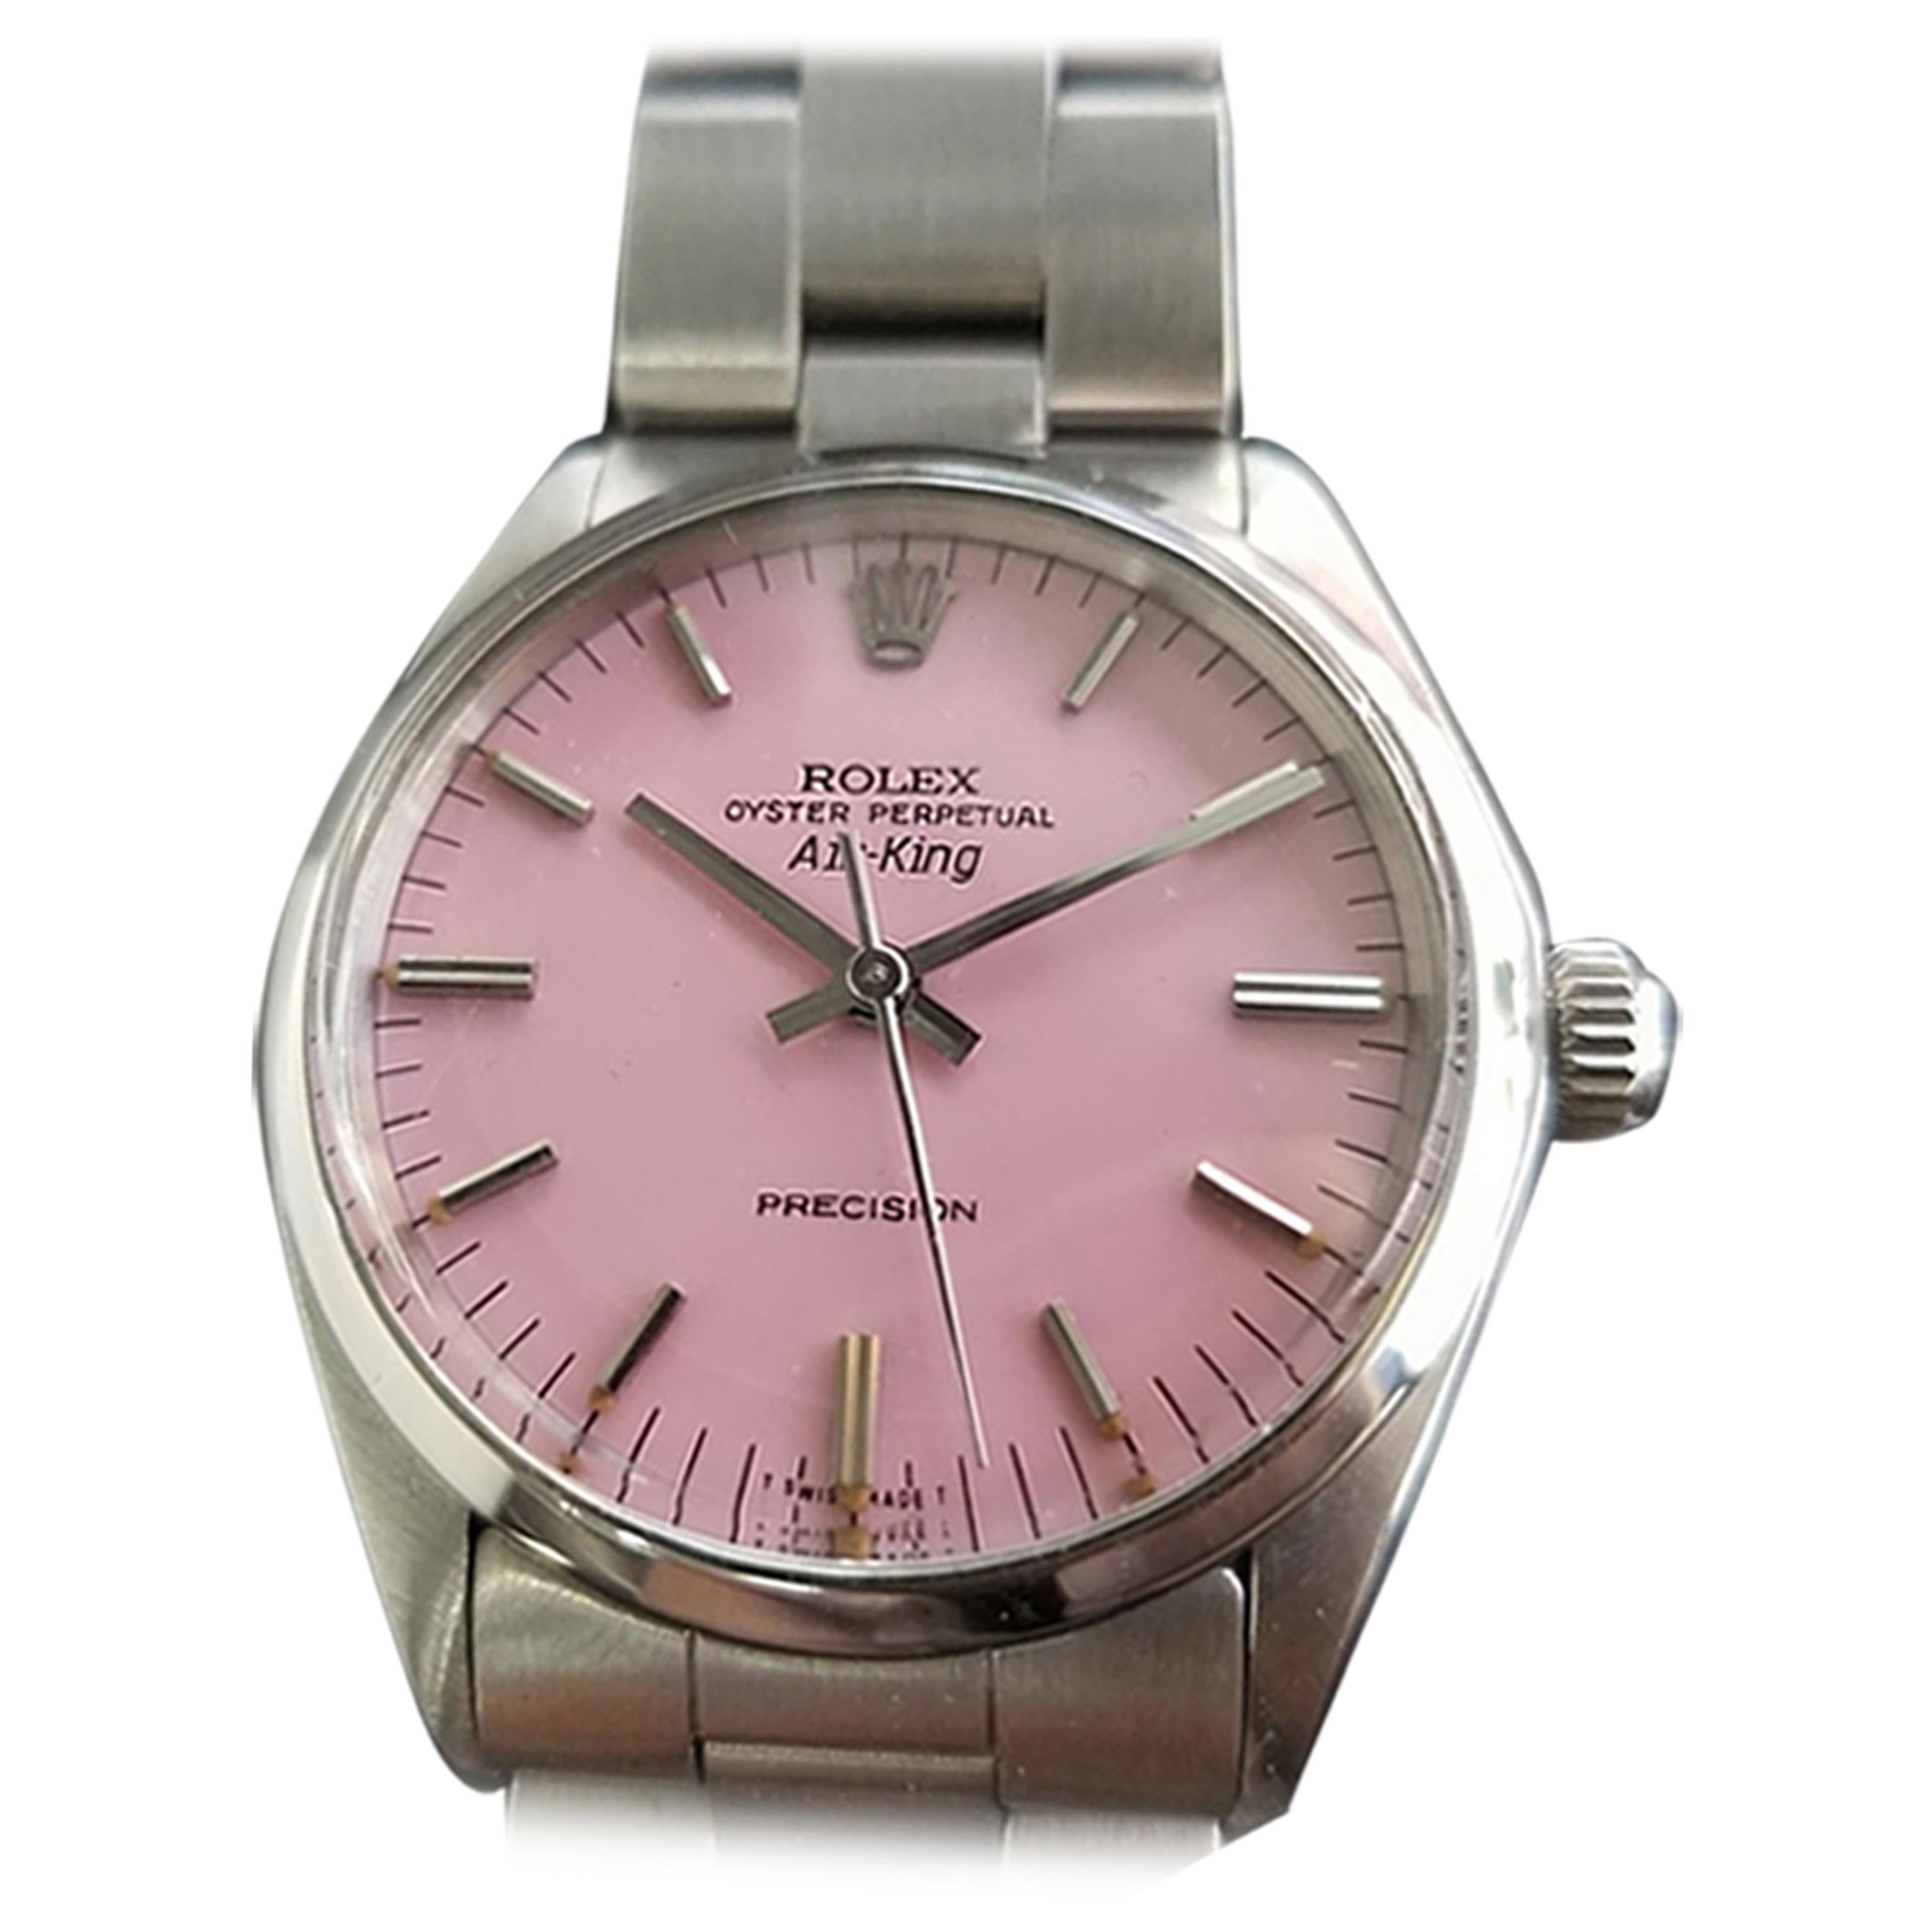 Mens Rolex Oyster Precision 1002 "Air-King" Automatic, c.1970s Swiss RA118